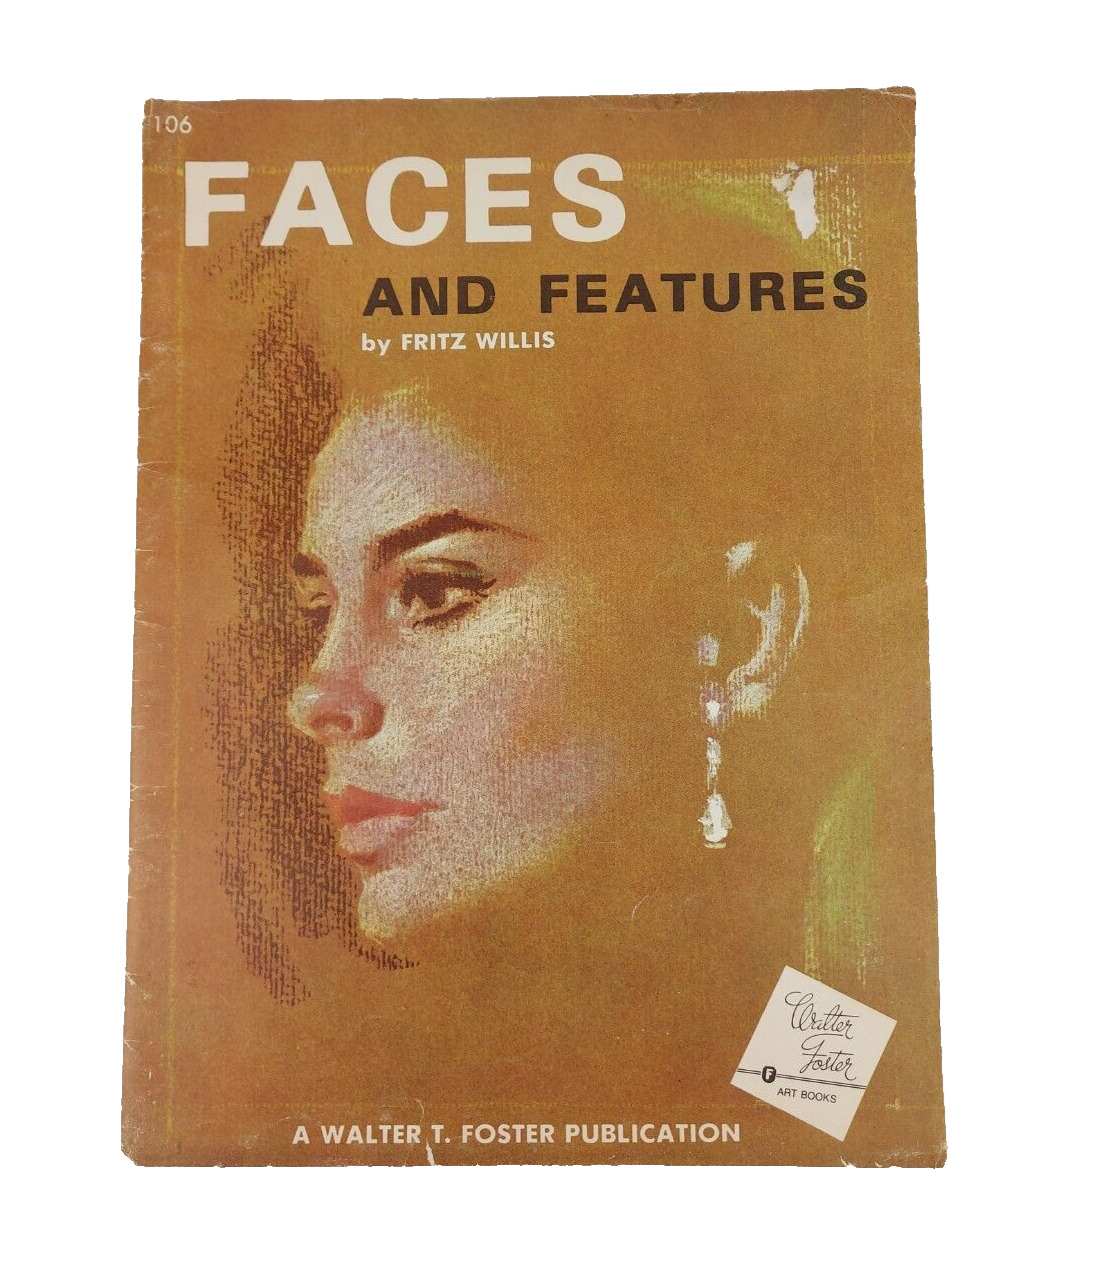 Vintage Faces And Features By Fritz Willis #106 Walter T Foster Publication Book